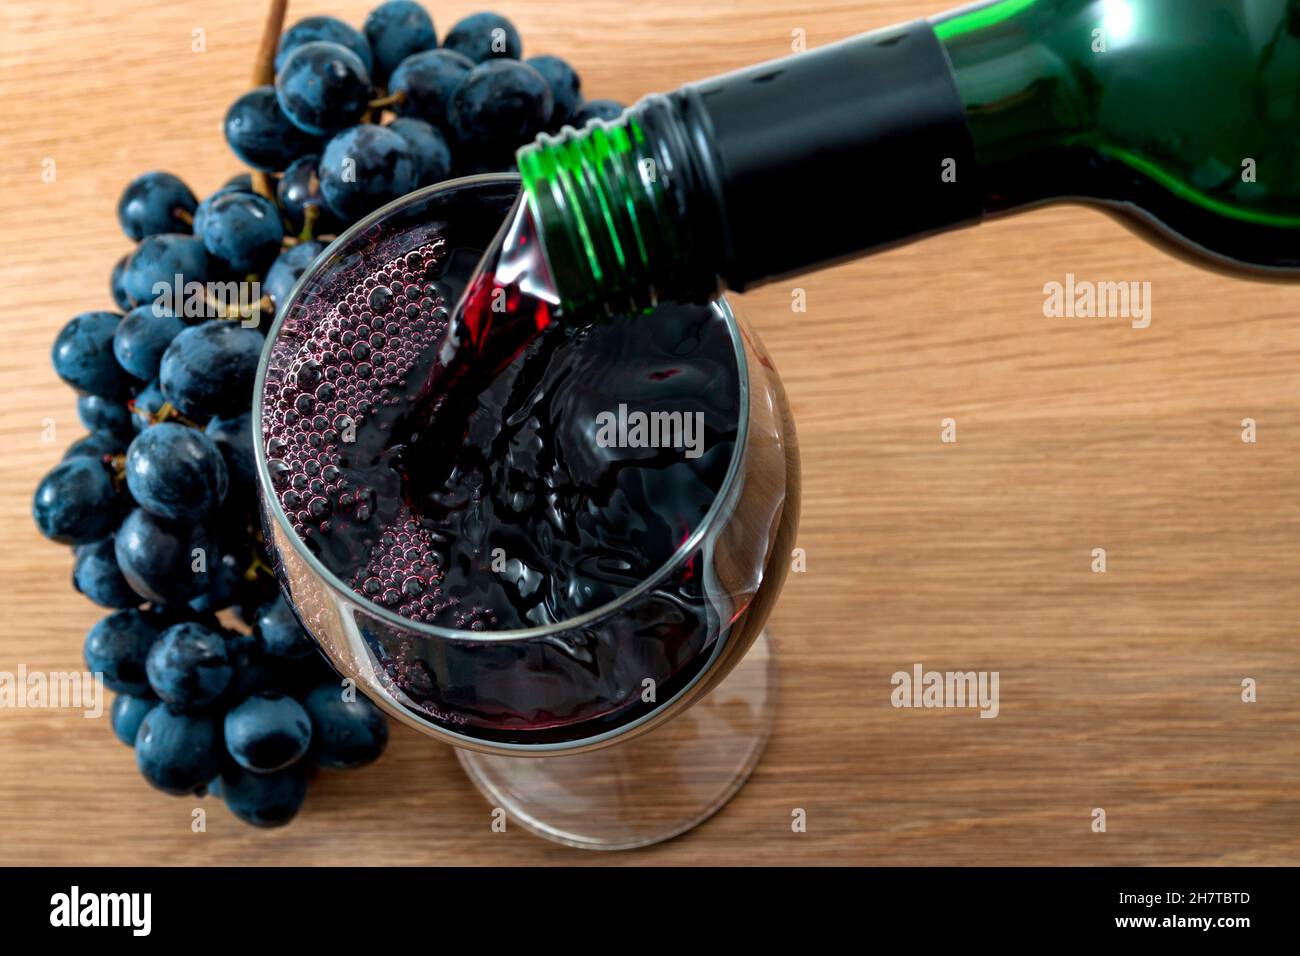 Alcoholic drink, wine making and alcohol industry concept with red wine pouring from a bottle into a glass on a wooden table in the rustic setting of Stock Photo